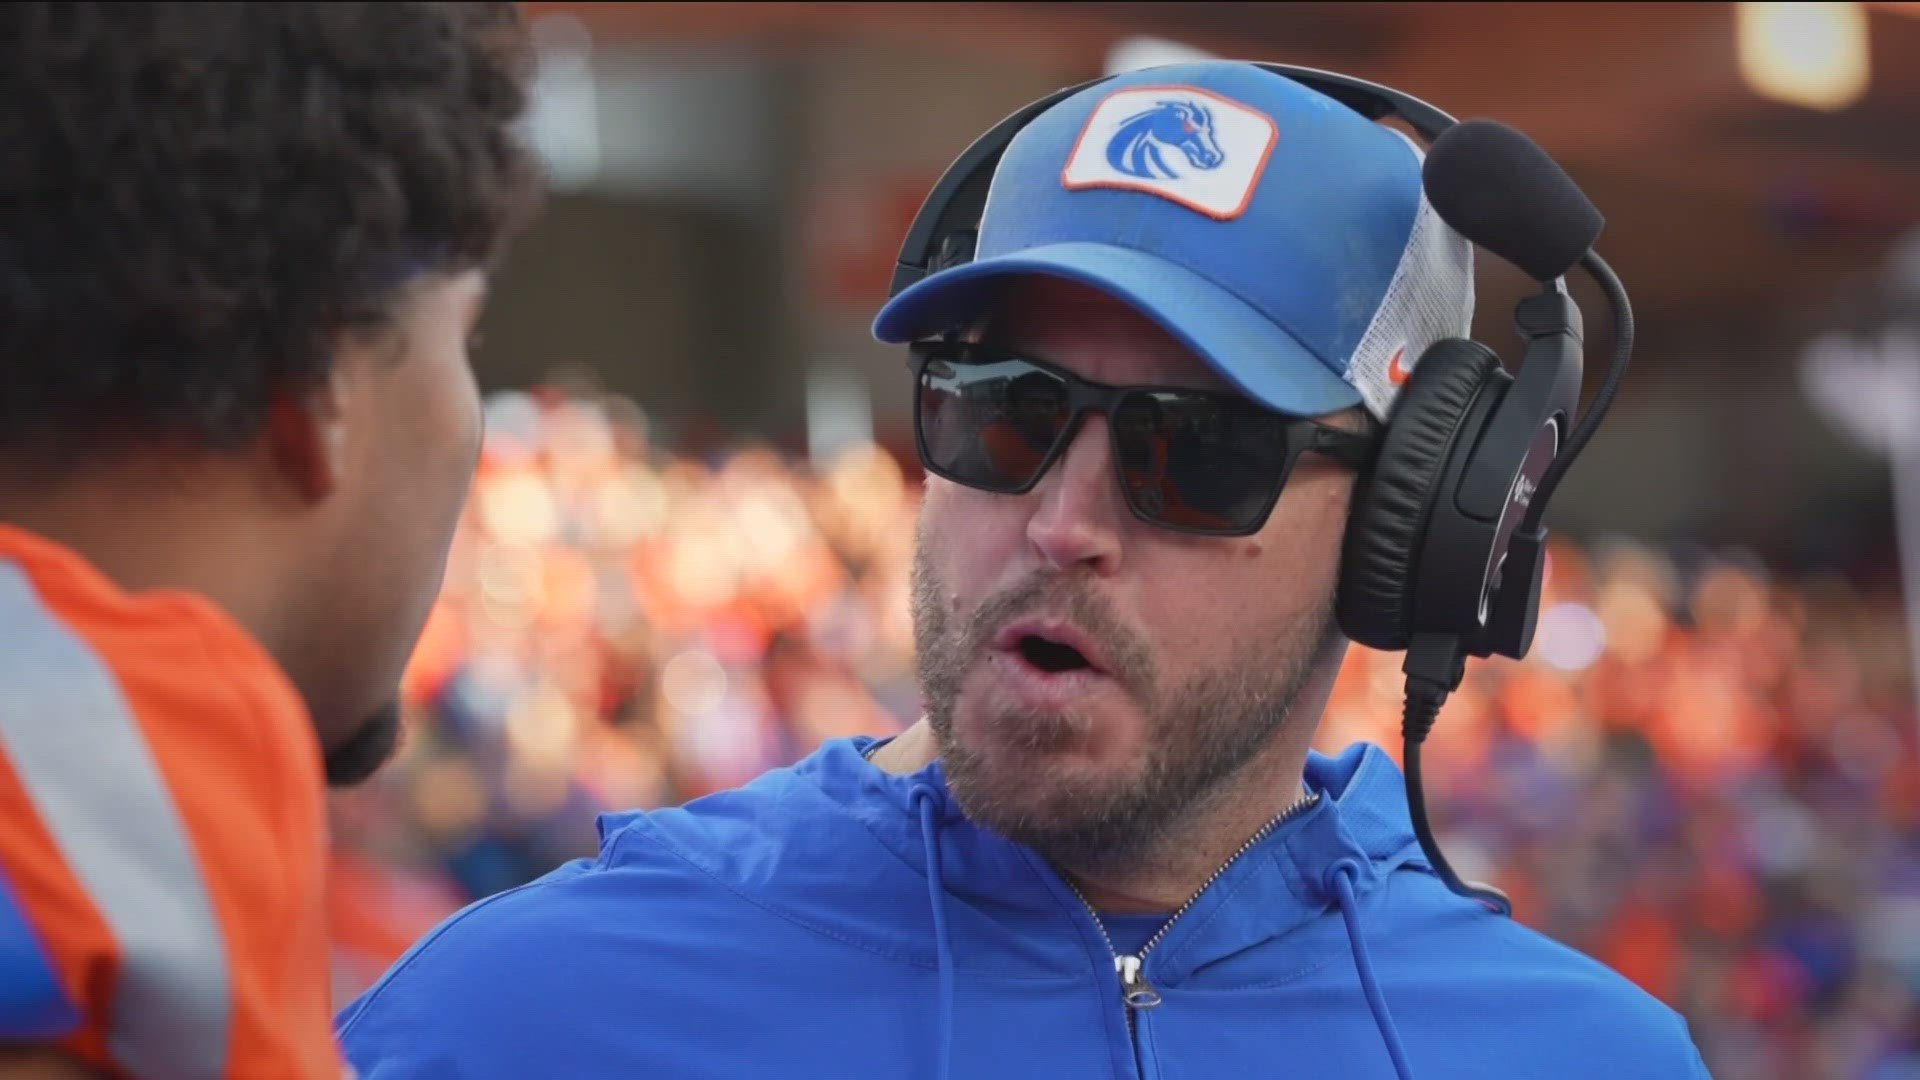 Chinander is set to become the highest paid defensive assistant in Boise State history. Spencer Danielson will call plays in the LA Bowl before Chinander takes over.